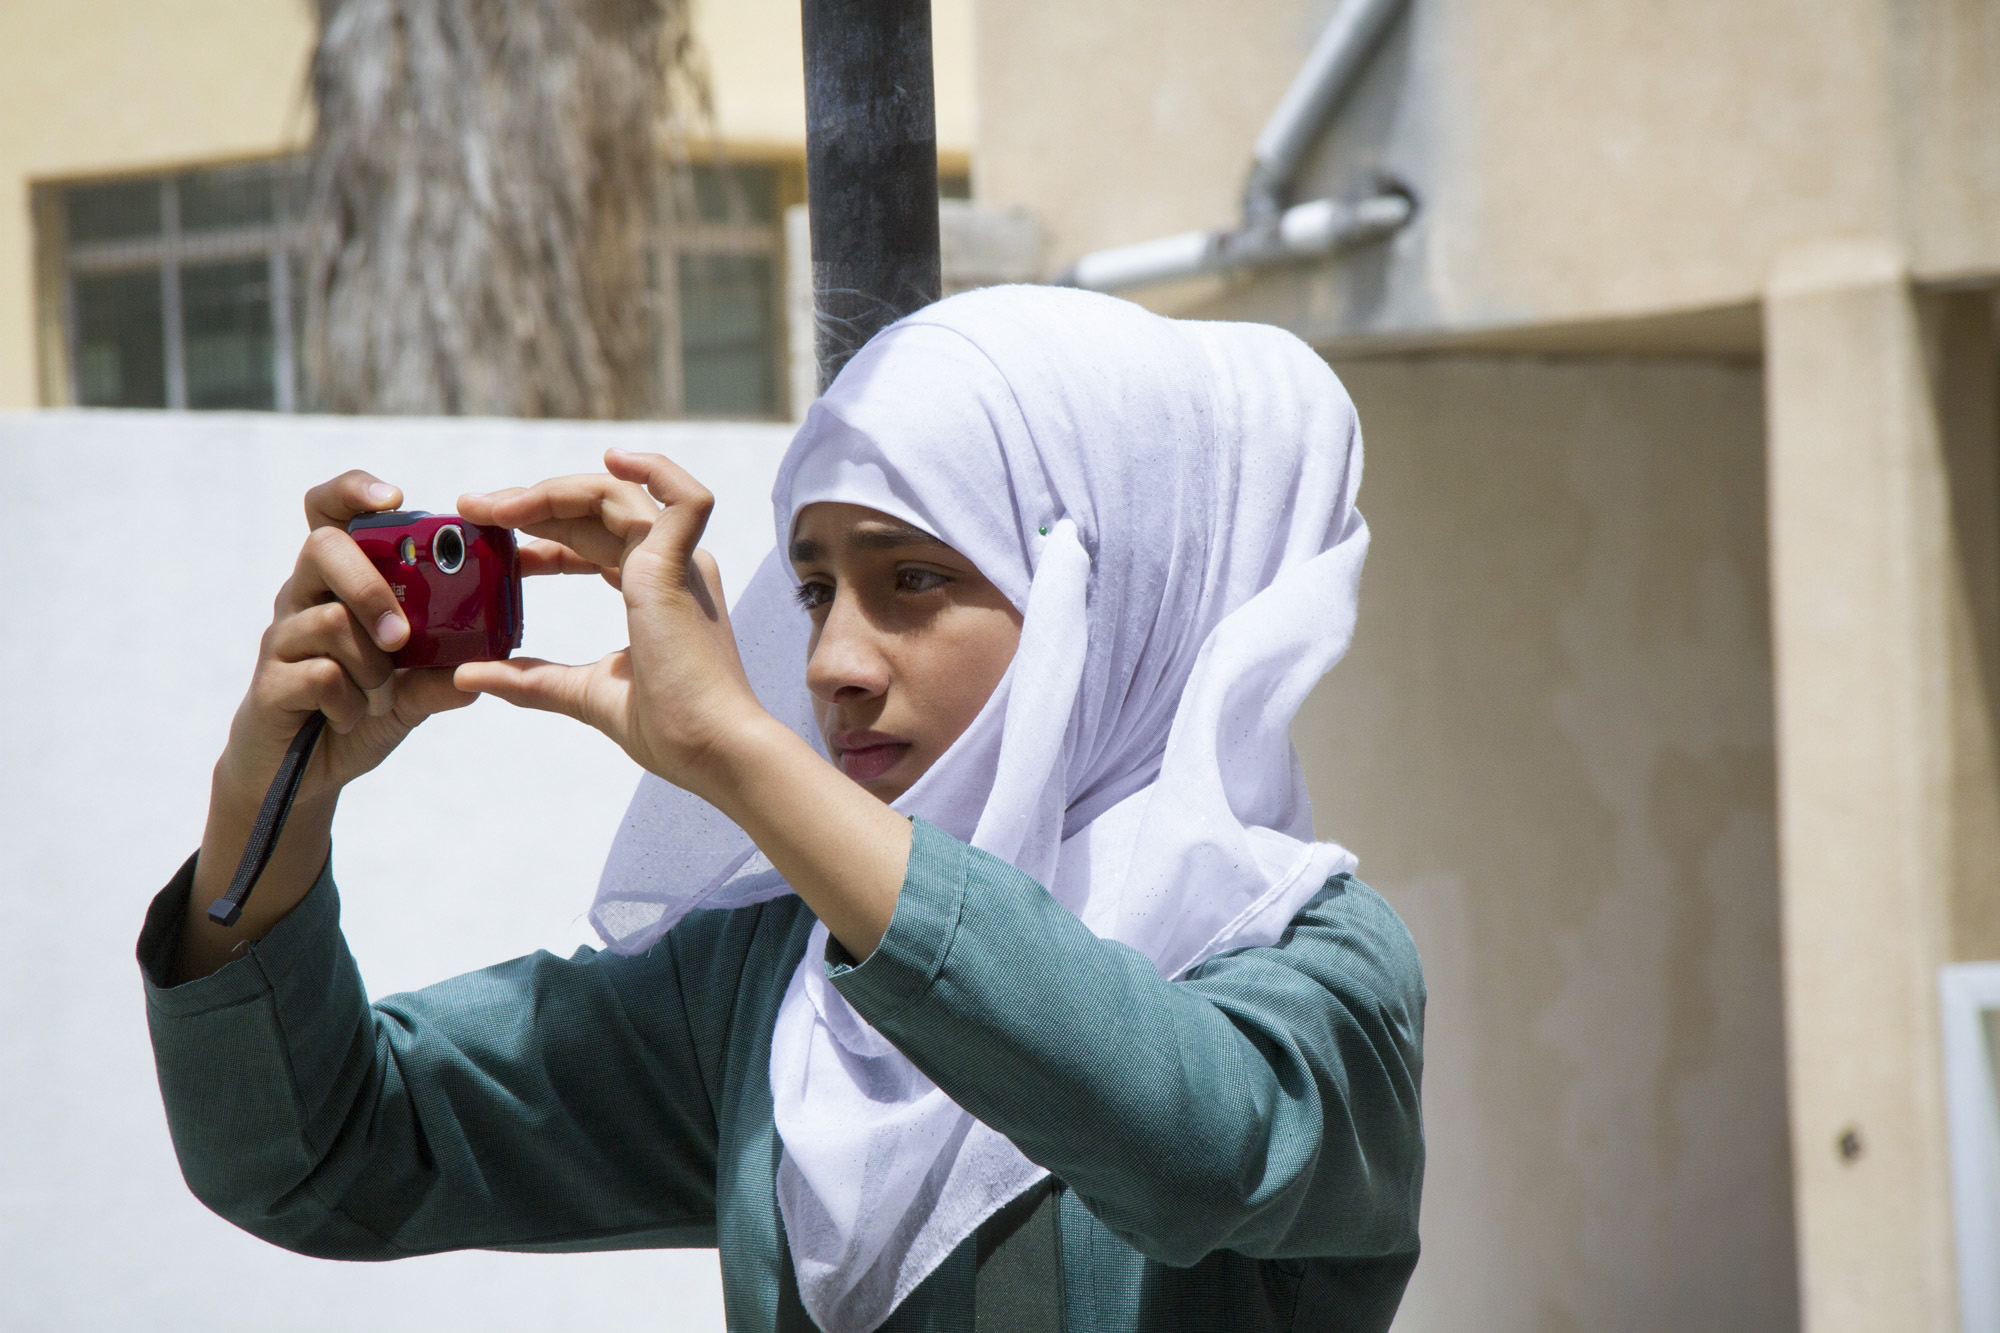 The Syrian 7th grader Maryam takes pictures of her daily routine. Each of the students take the task very seriously.